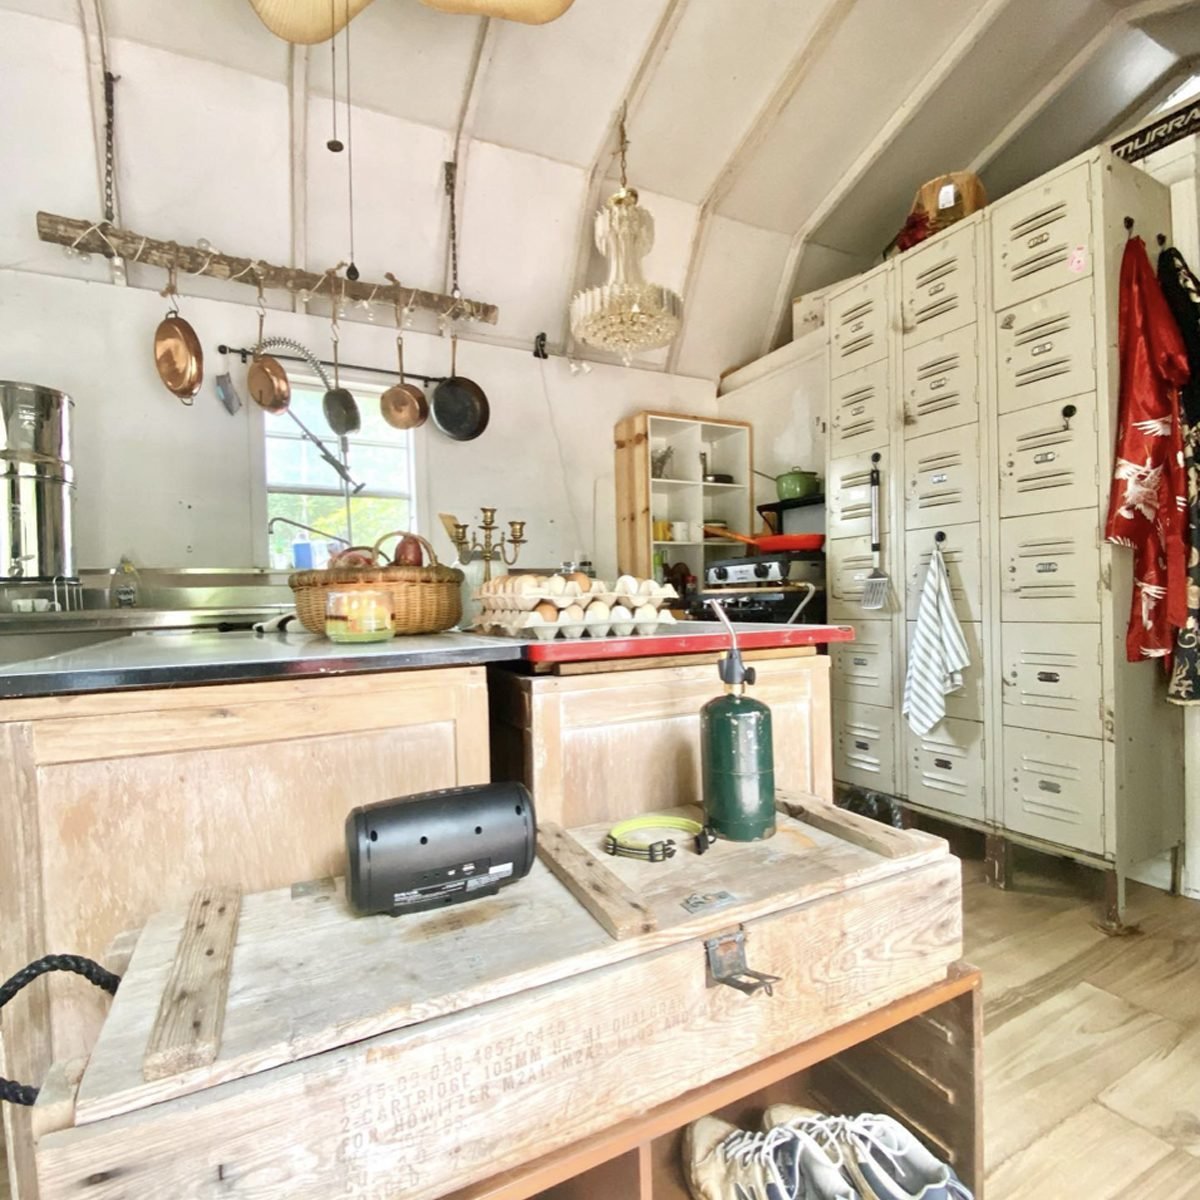 Photos of Tiny-House Kitchens Show How Creative Homeowners Can Be